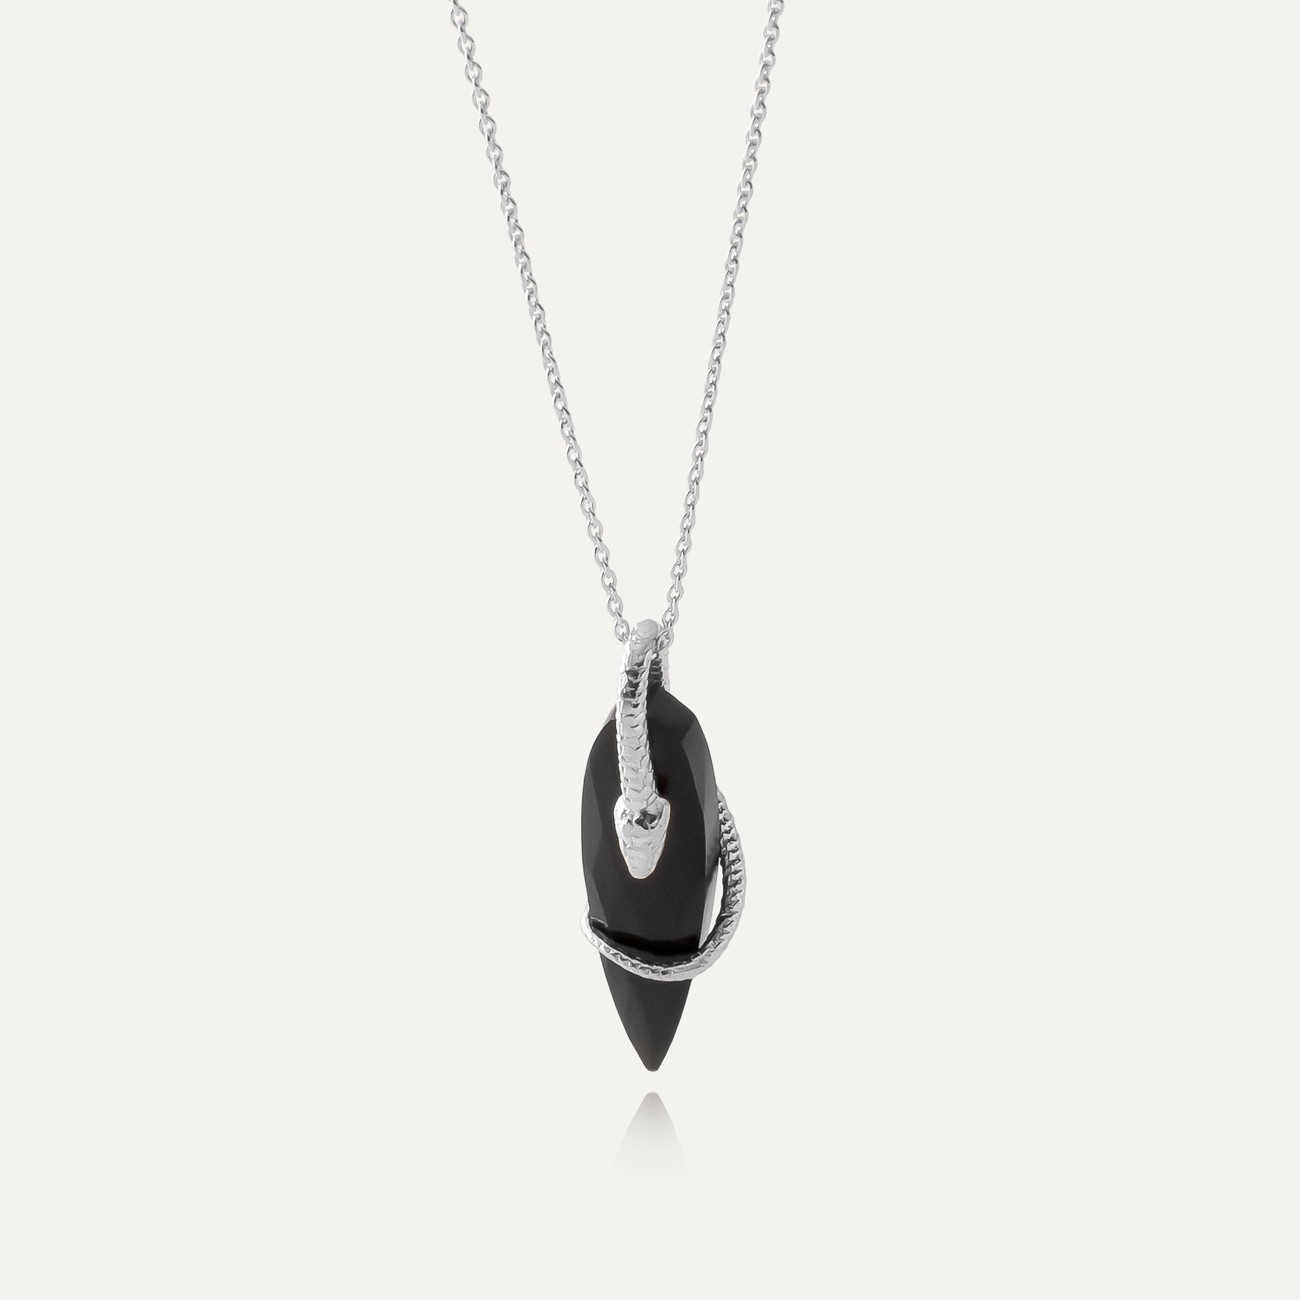 Snake necklace with natural stone black onyx icicle, 925 silver